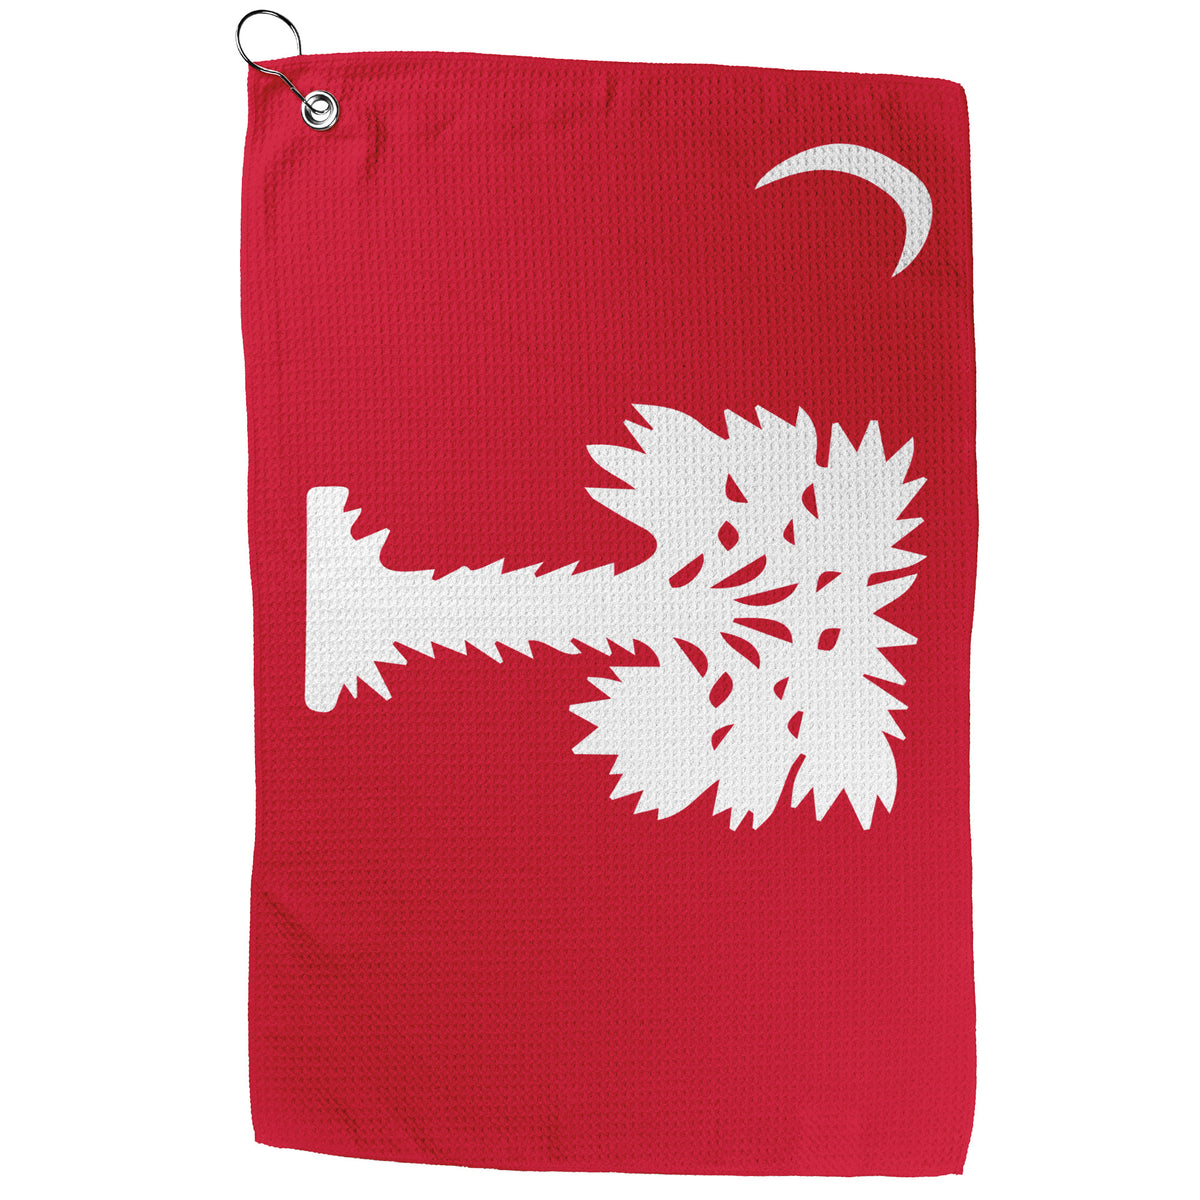 The Citadel, Big Red 15 x 25 Double Sided Golf Towel